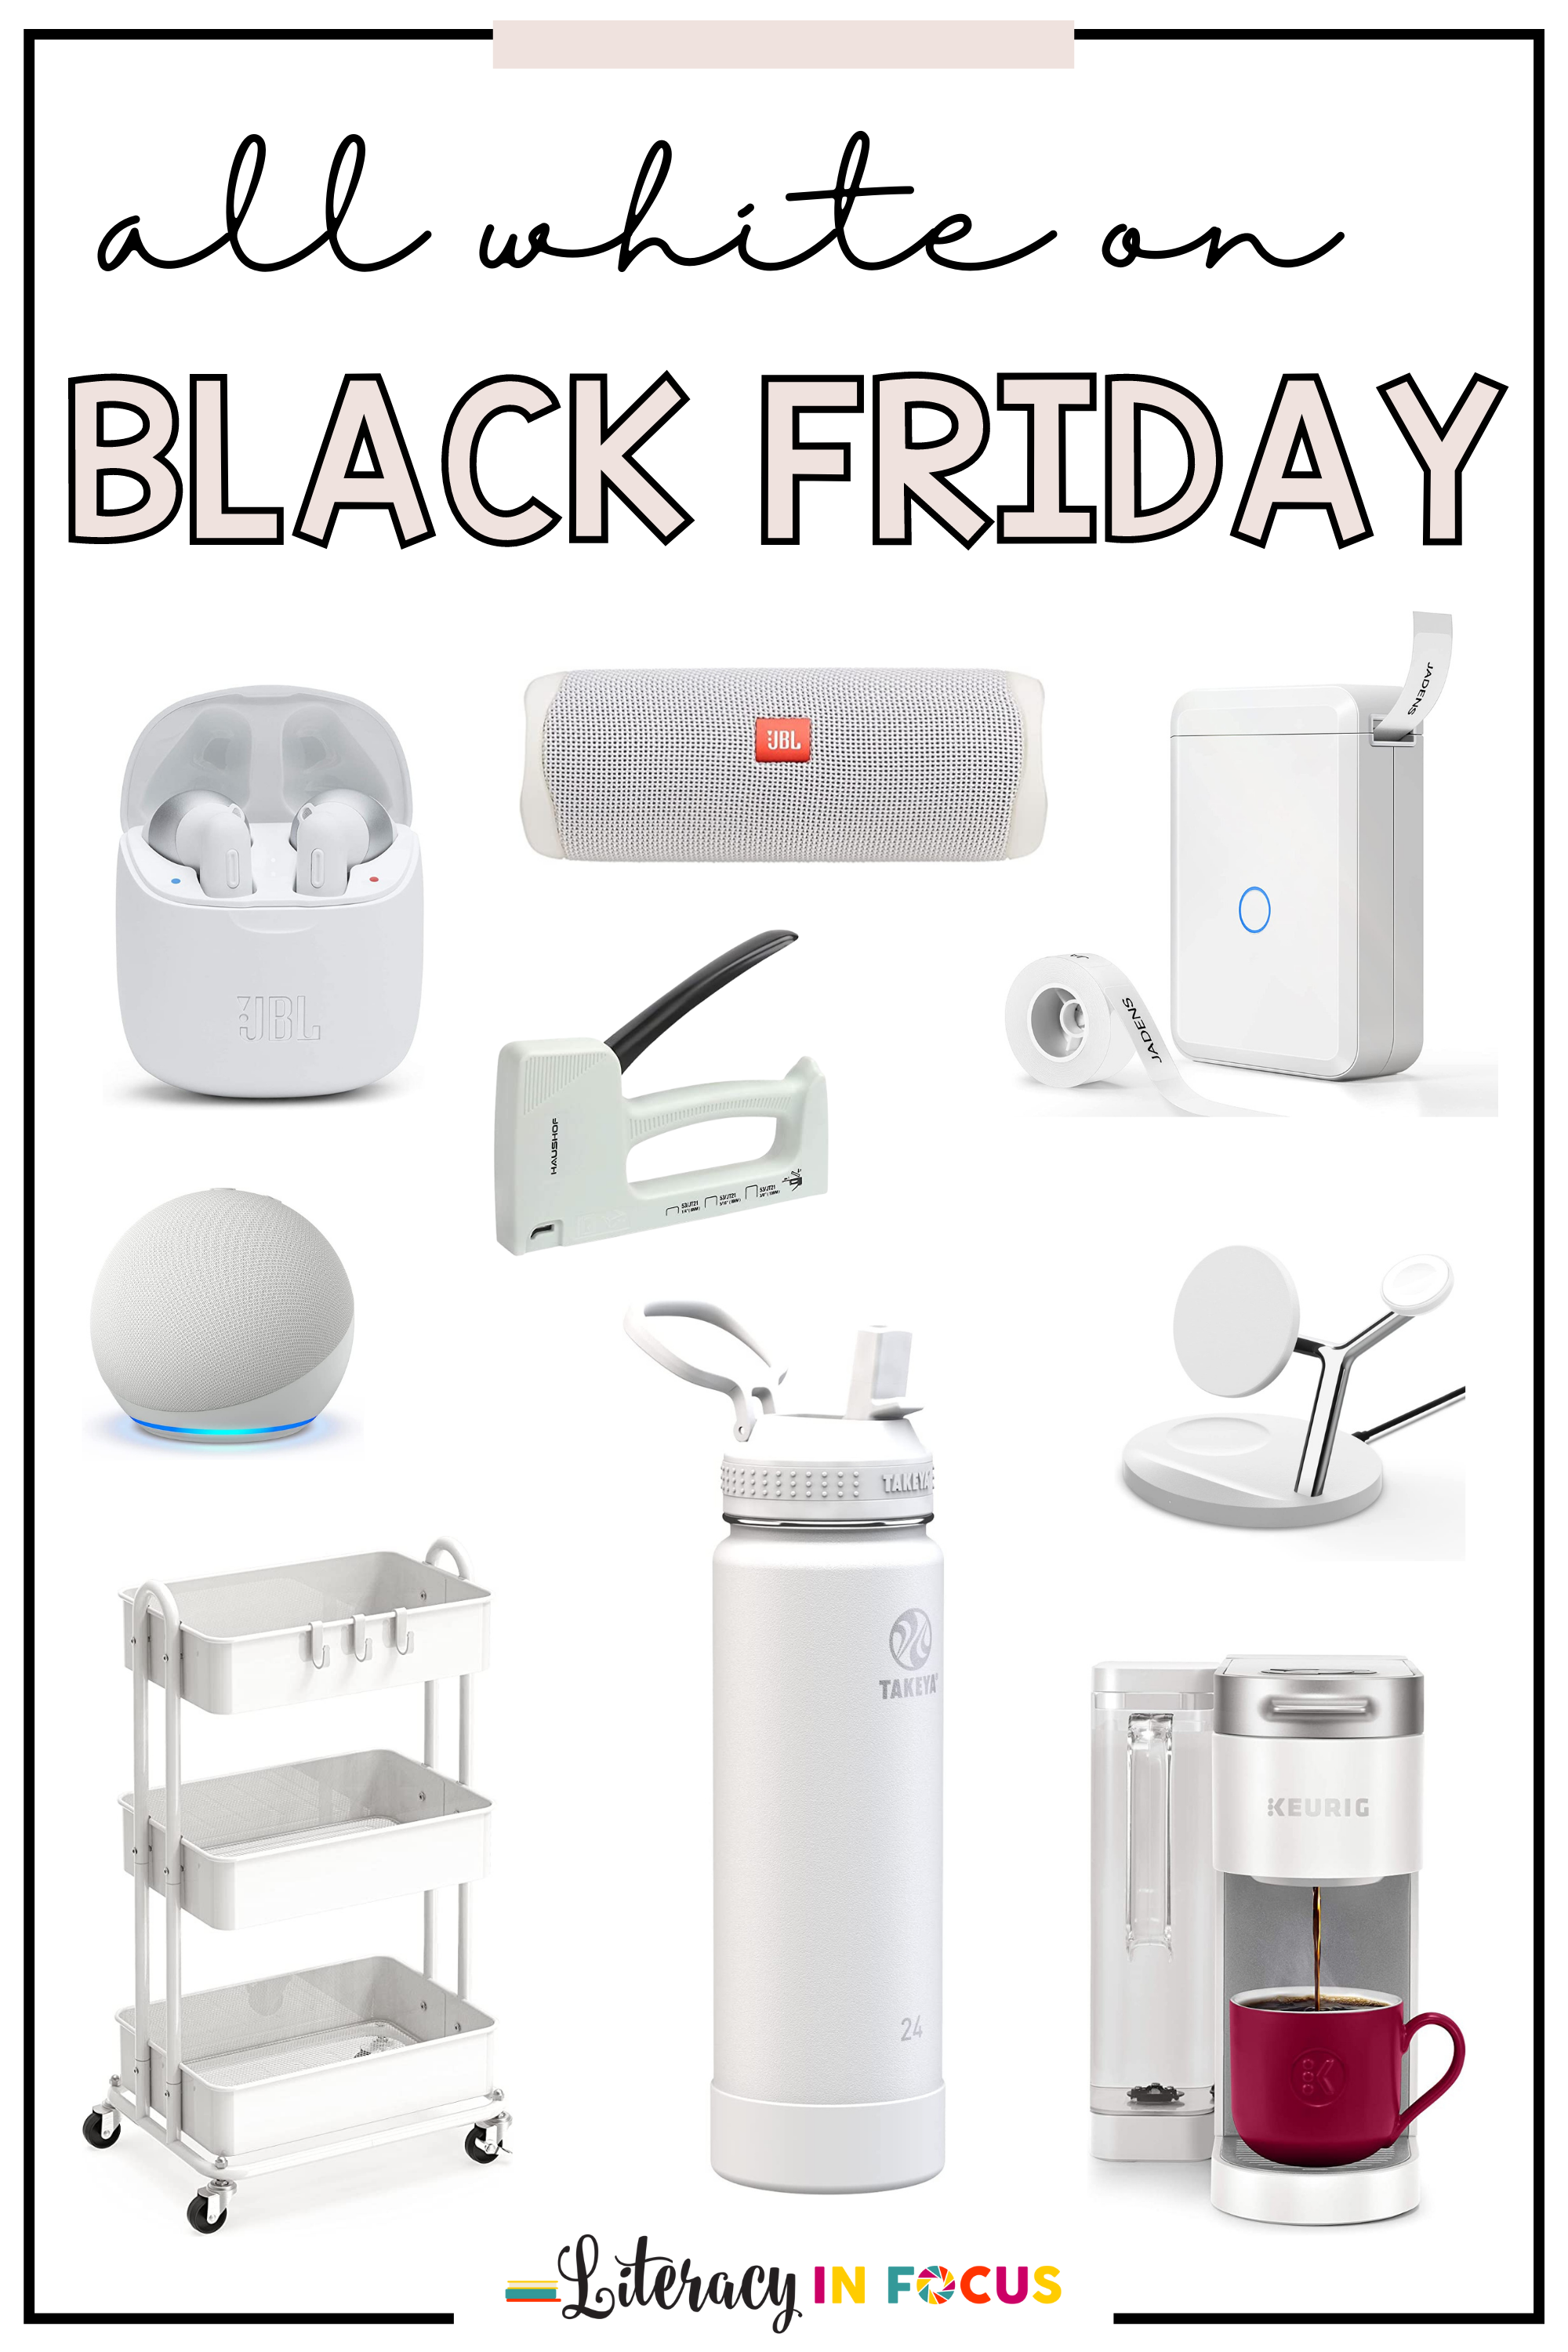 Black Friday Deals for Teachers | Classroom Finds on Amazon